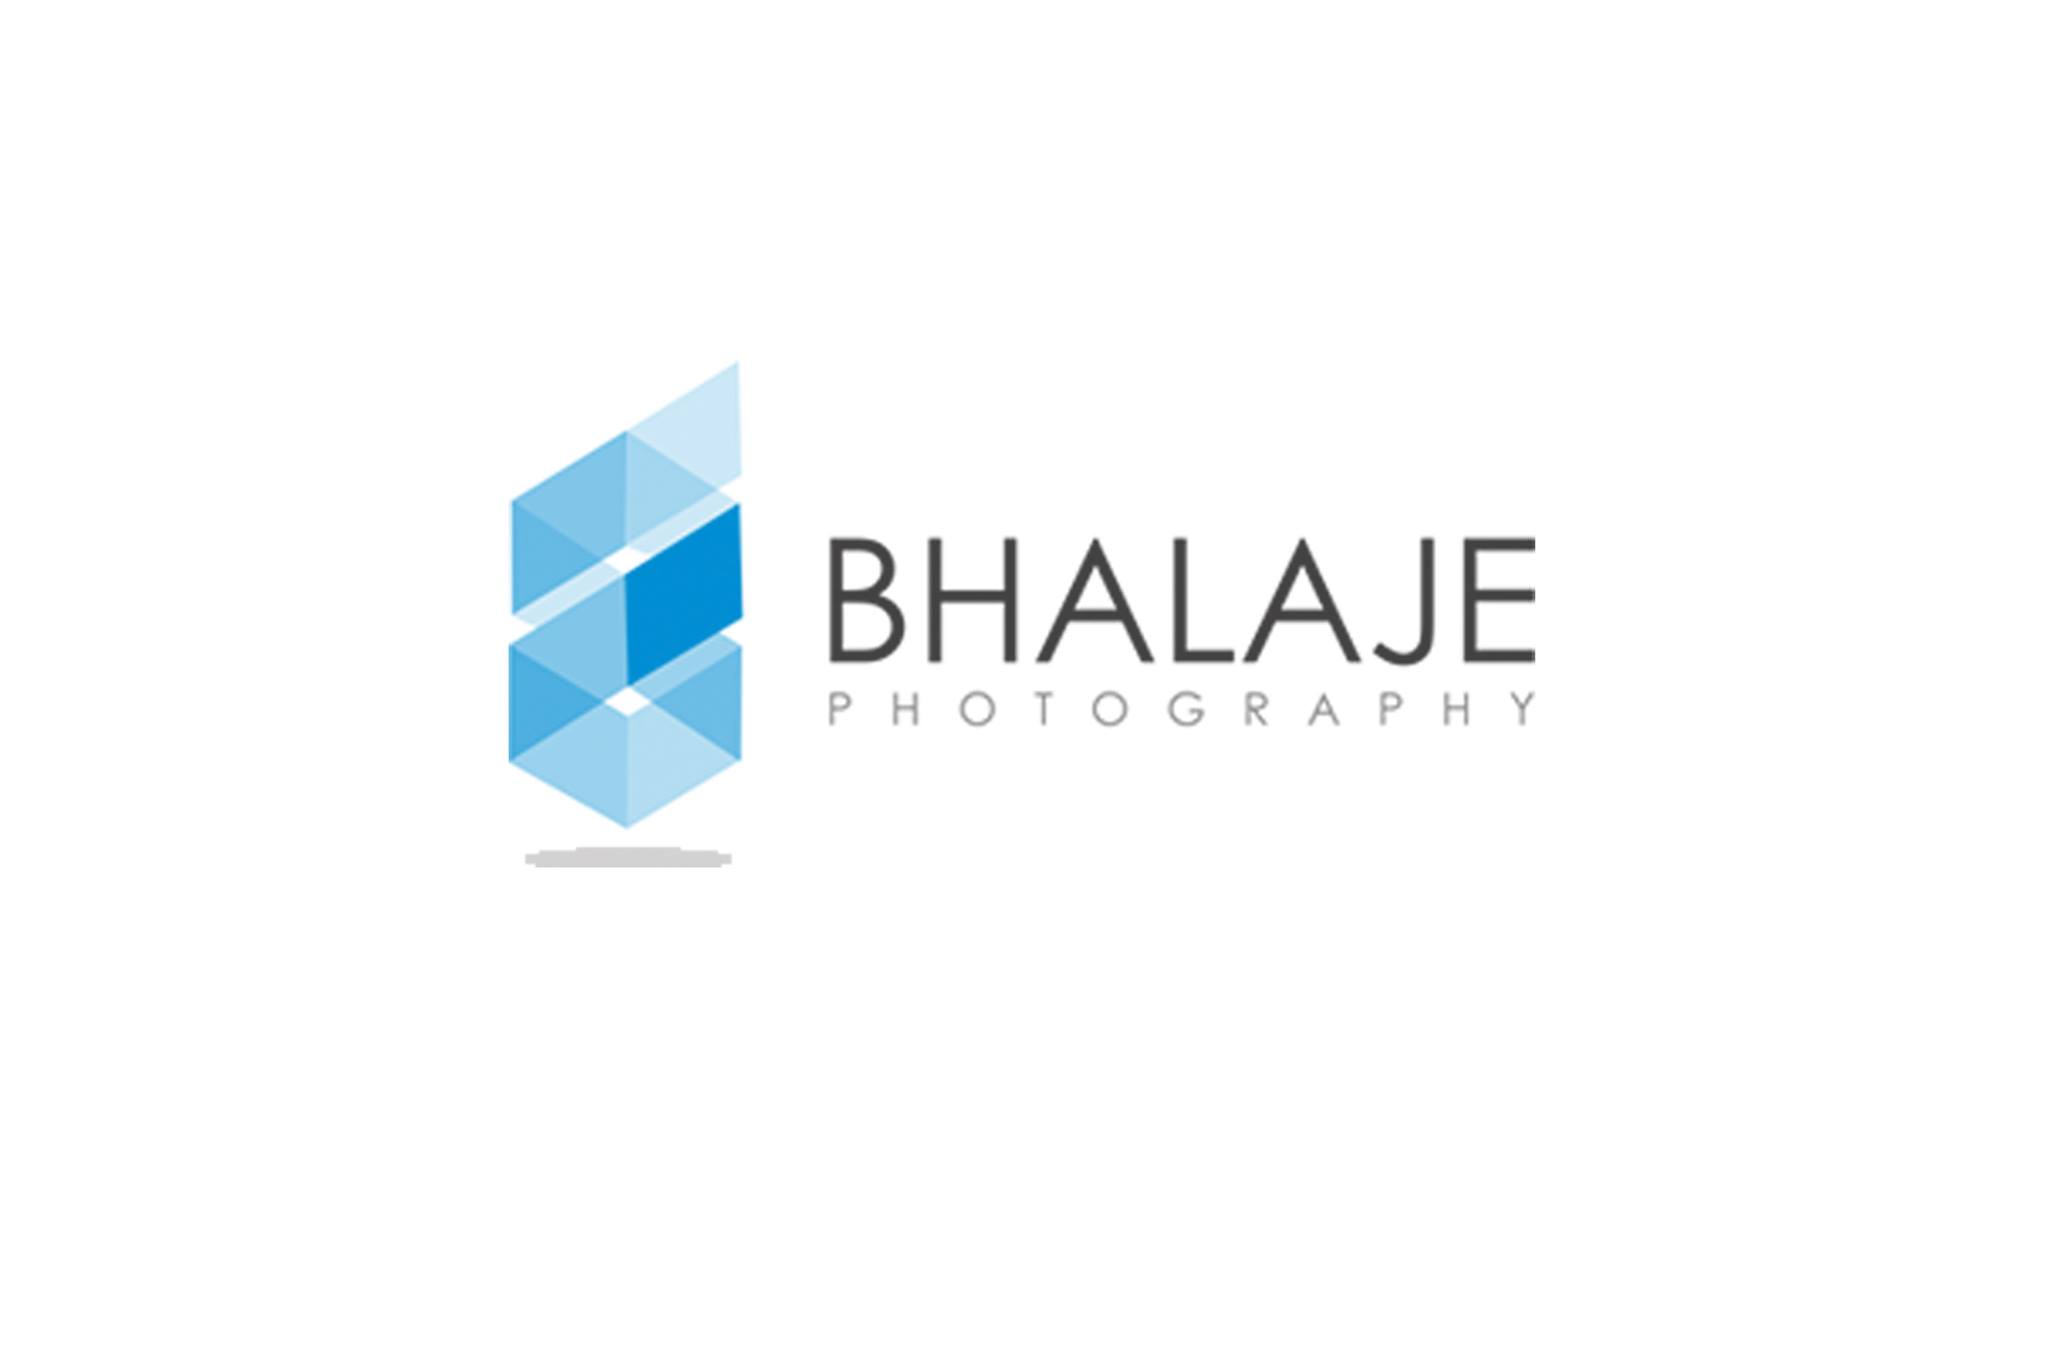 Bhalaje Photography|Photographer|Event Services